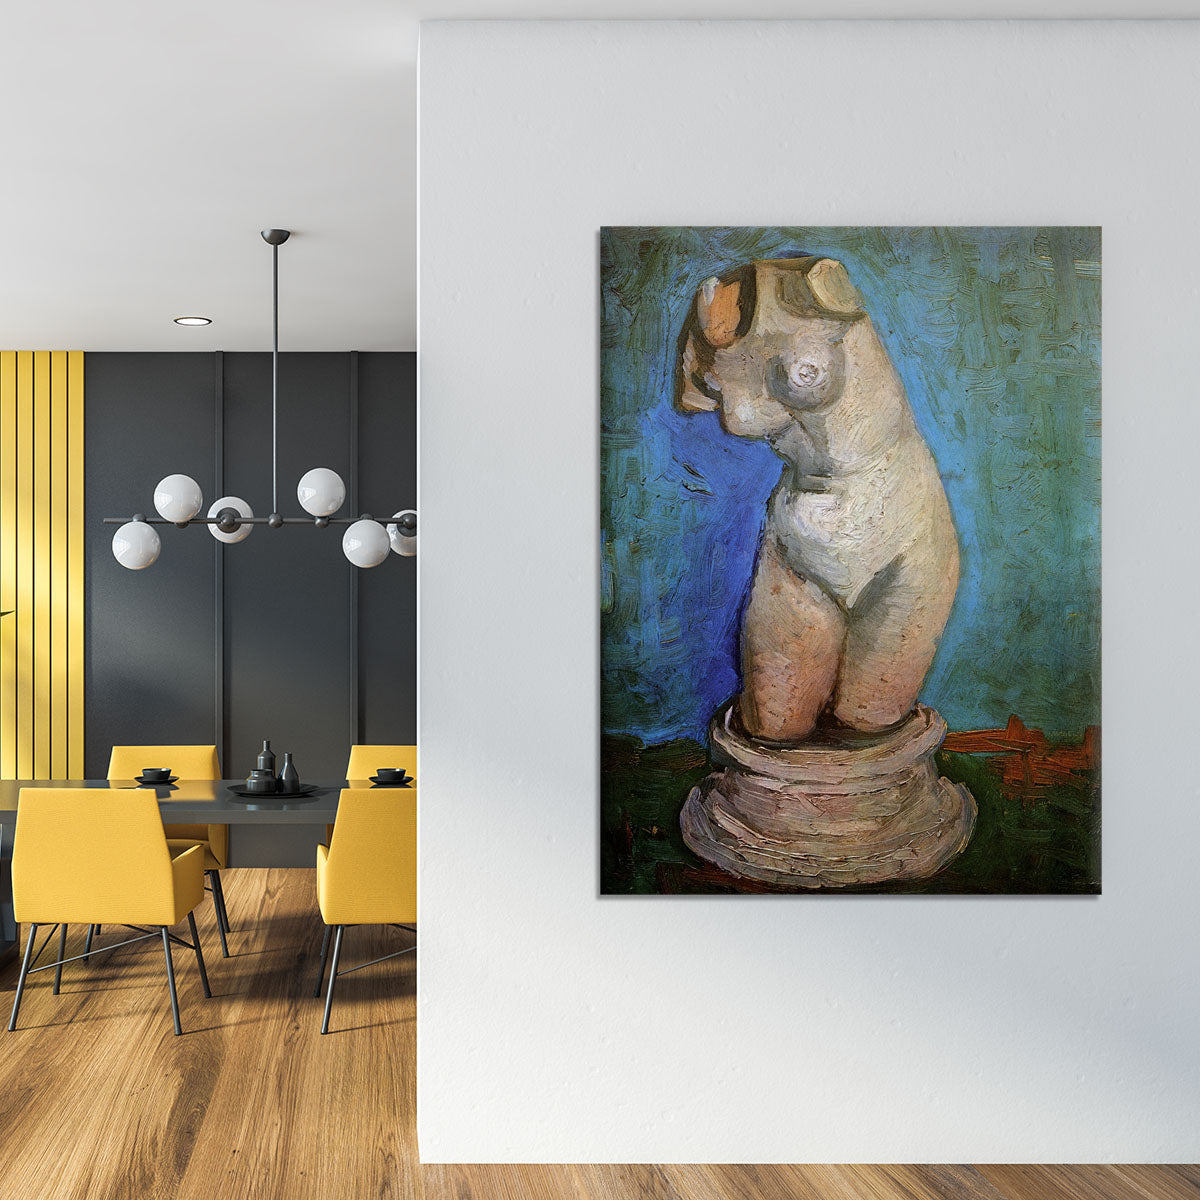 Plaster Statuette of a Female Torso 2 by Van Gogh Canvas Print or Poster - Canvas Art Rocks - 4